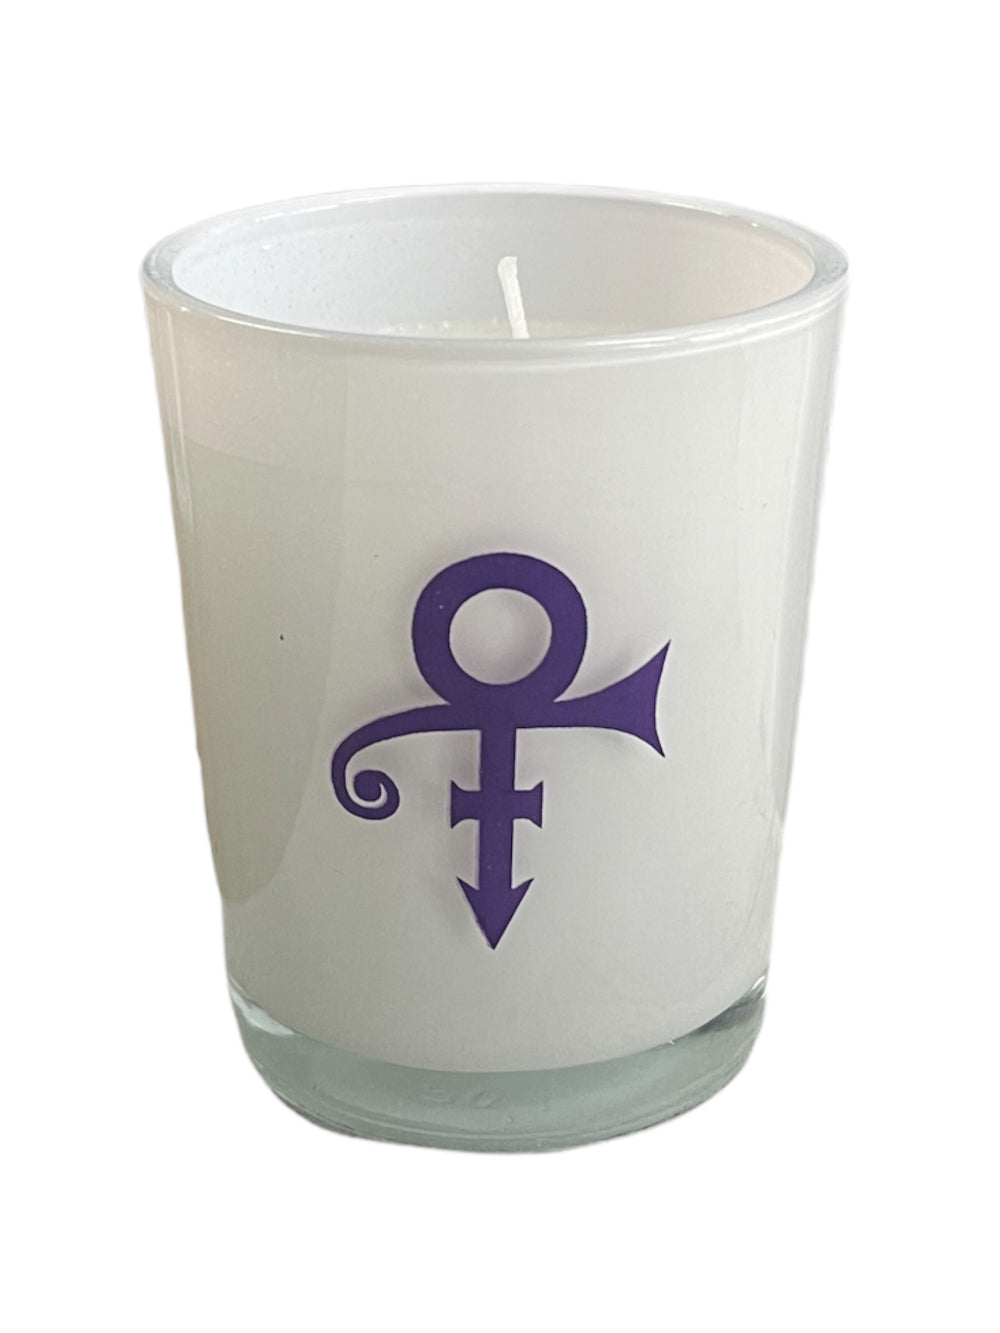 Prince – Purple Love Symbol Candle XCLUSIVE Official Merchandise Prince